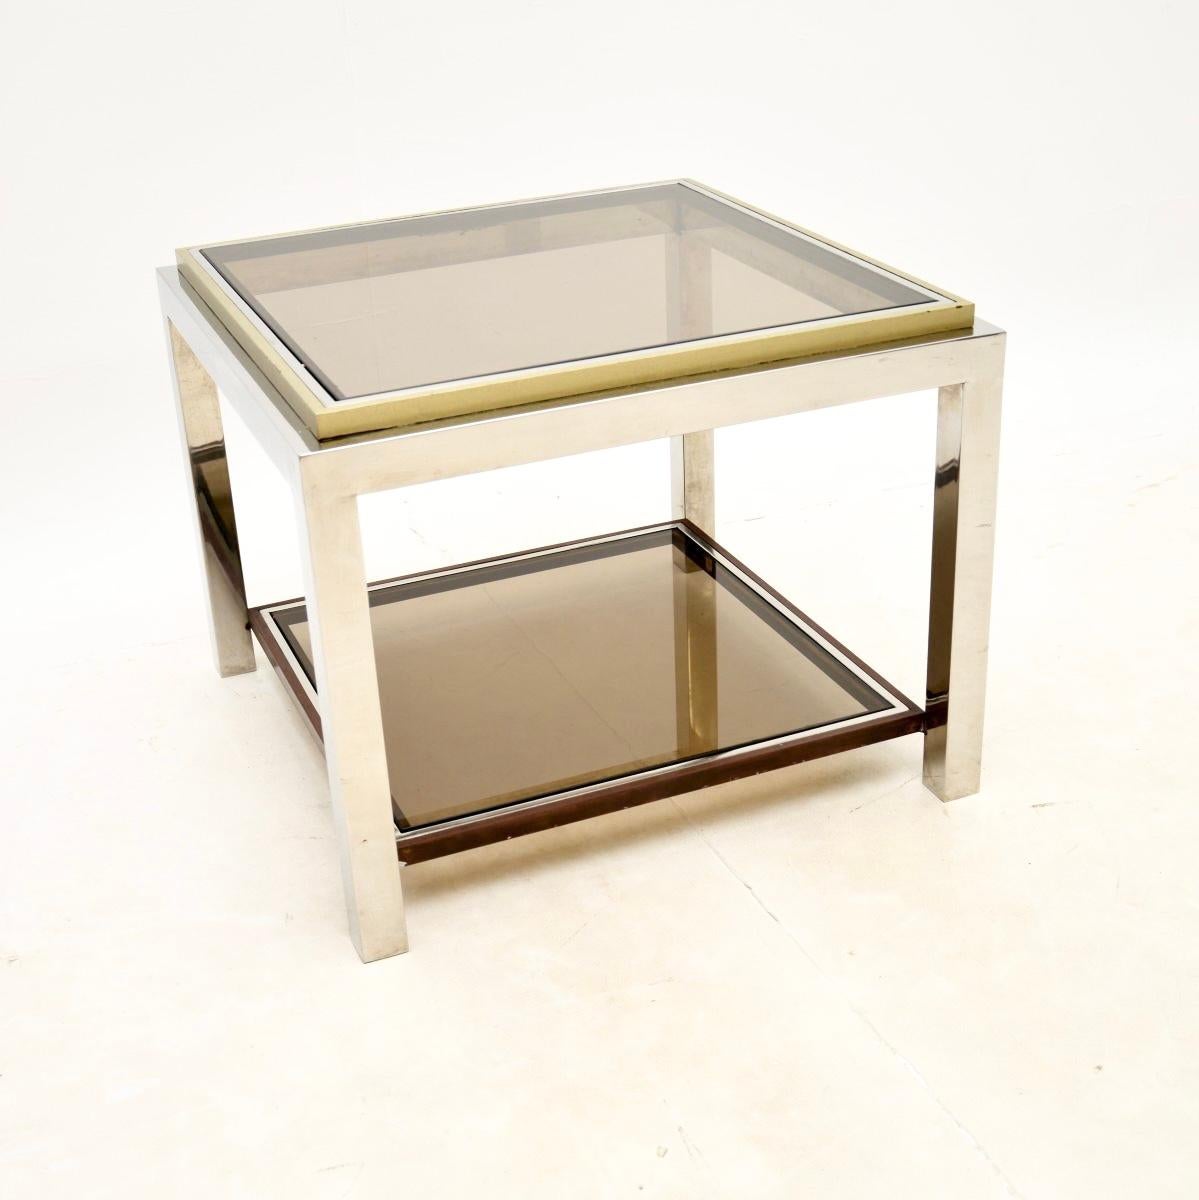 A fantastic vintage French chrome and brass side / coffee table, dating from the 1970’s.

This is of outstanding quality, the frame is extremely well made, thick and heavy. The chrome has brass finished trim around the top and lower tier, with